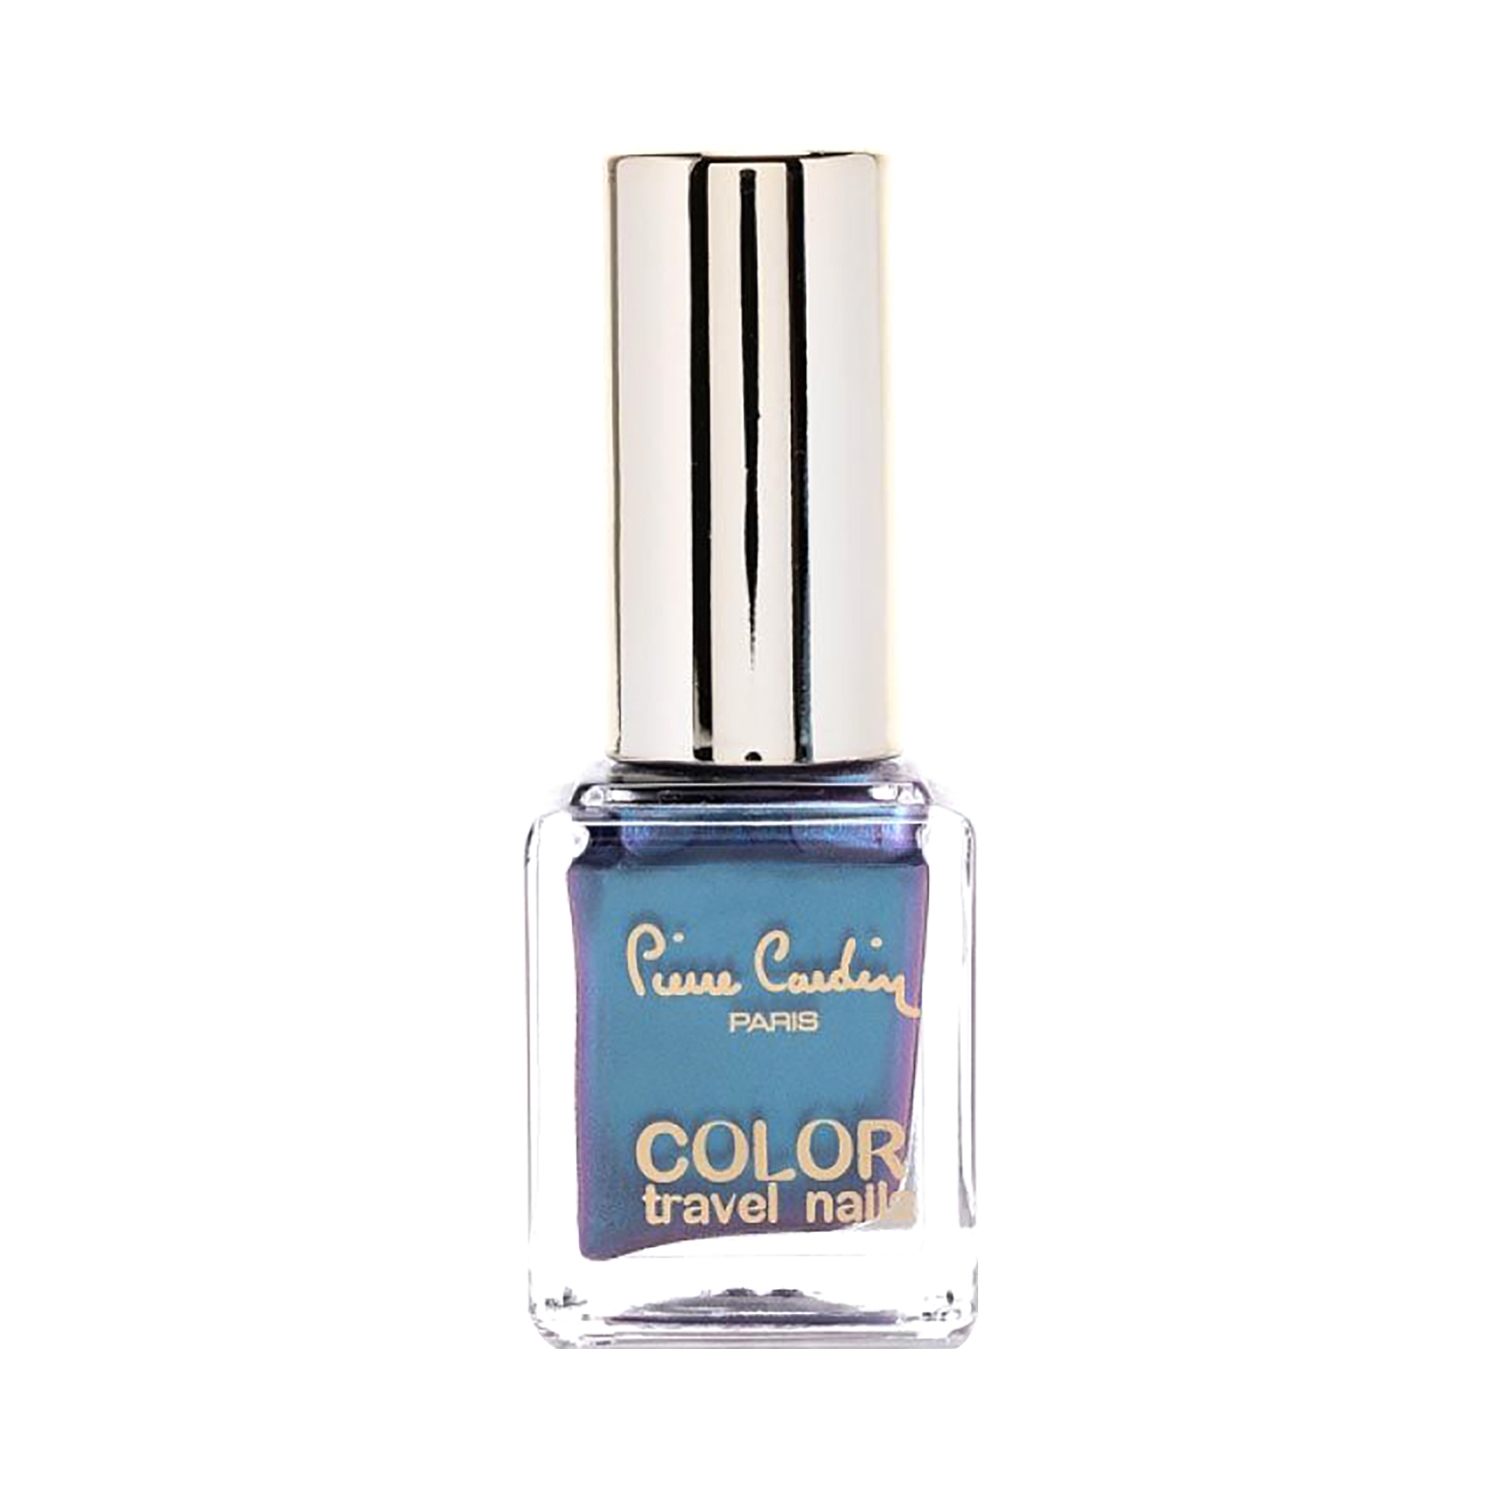 Pierre Cardin Paris Color Travel Nails - 106-Pearly Blue To Pink (11.5ml)